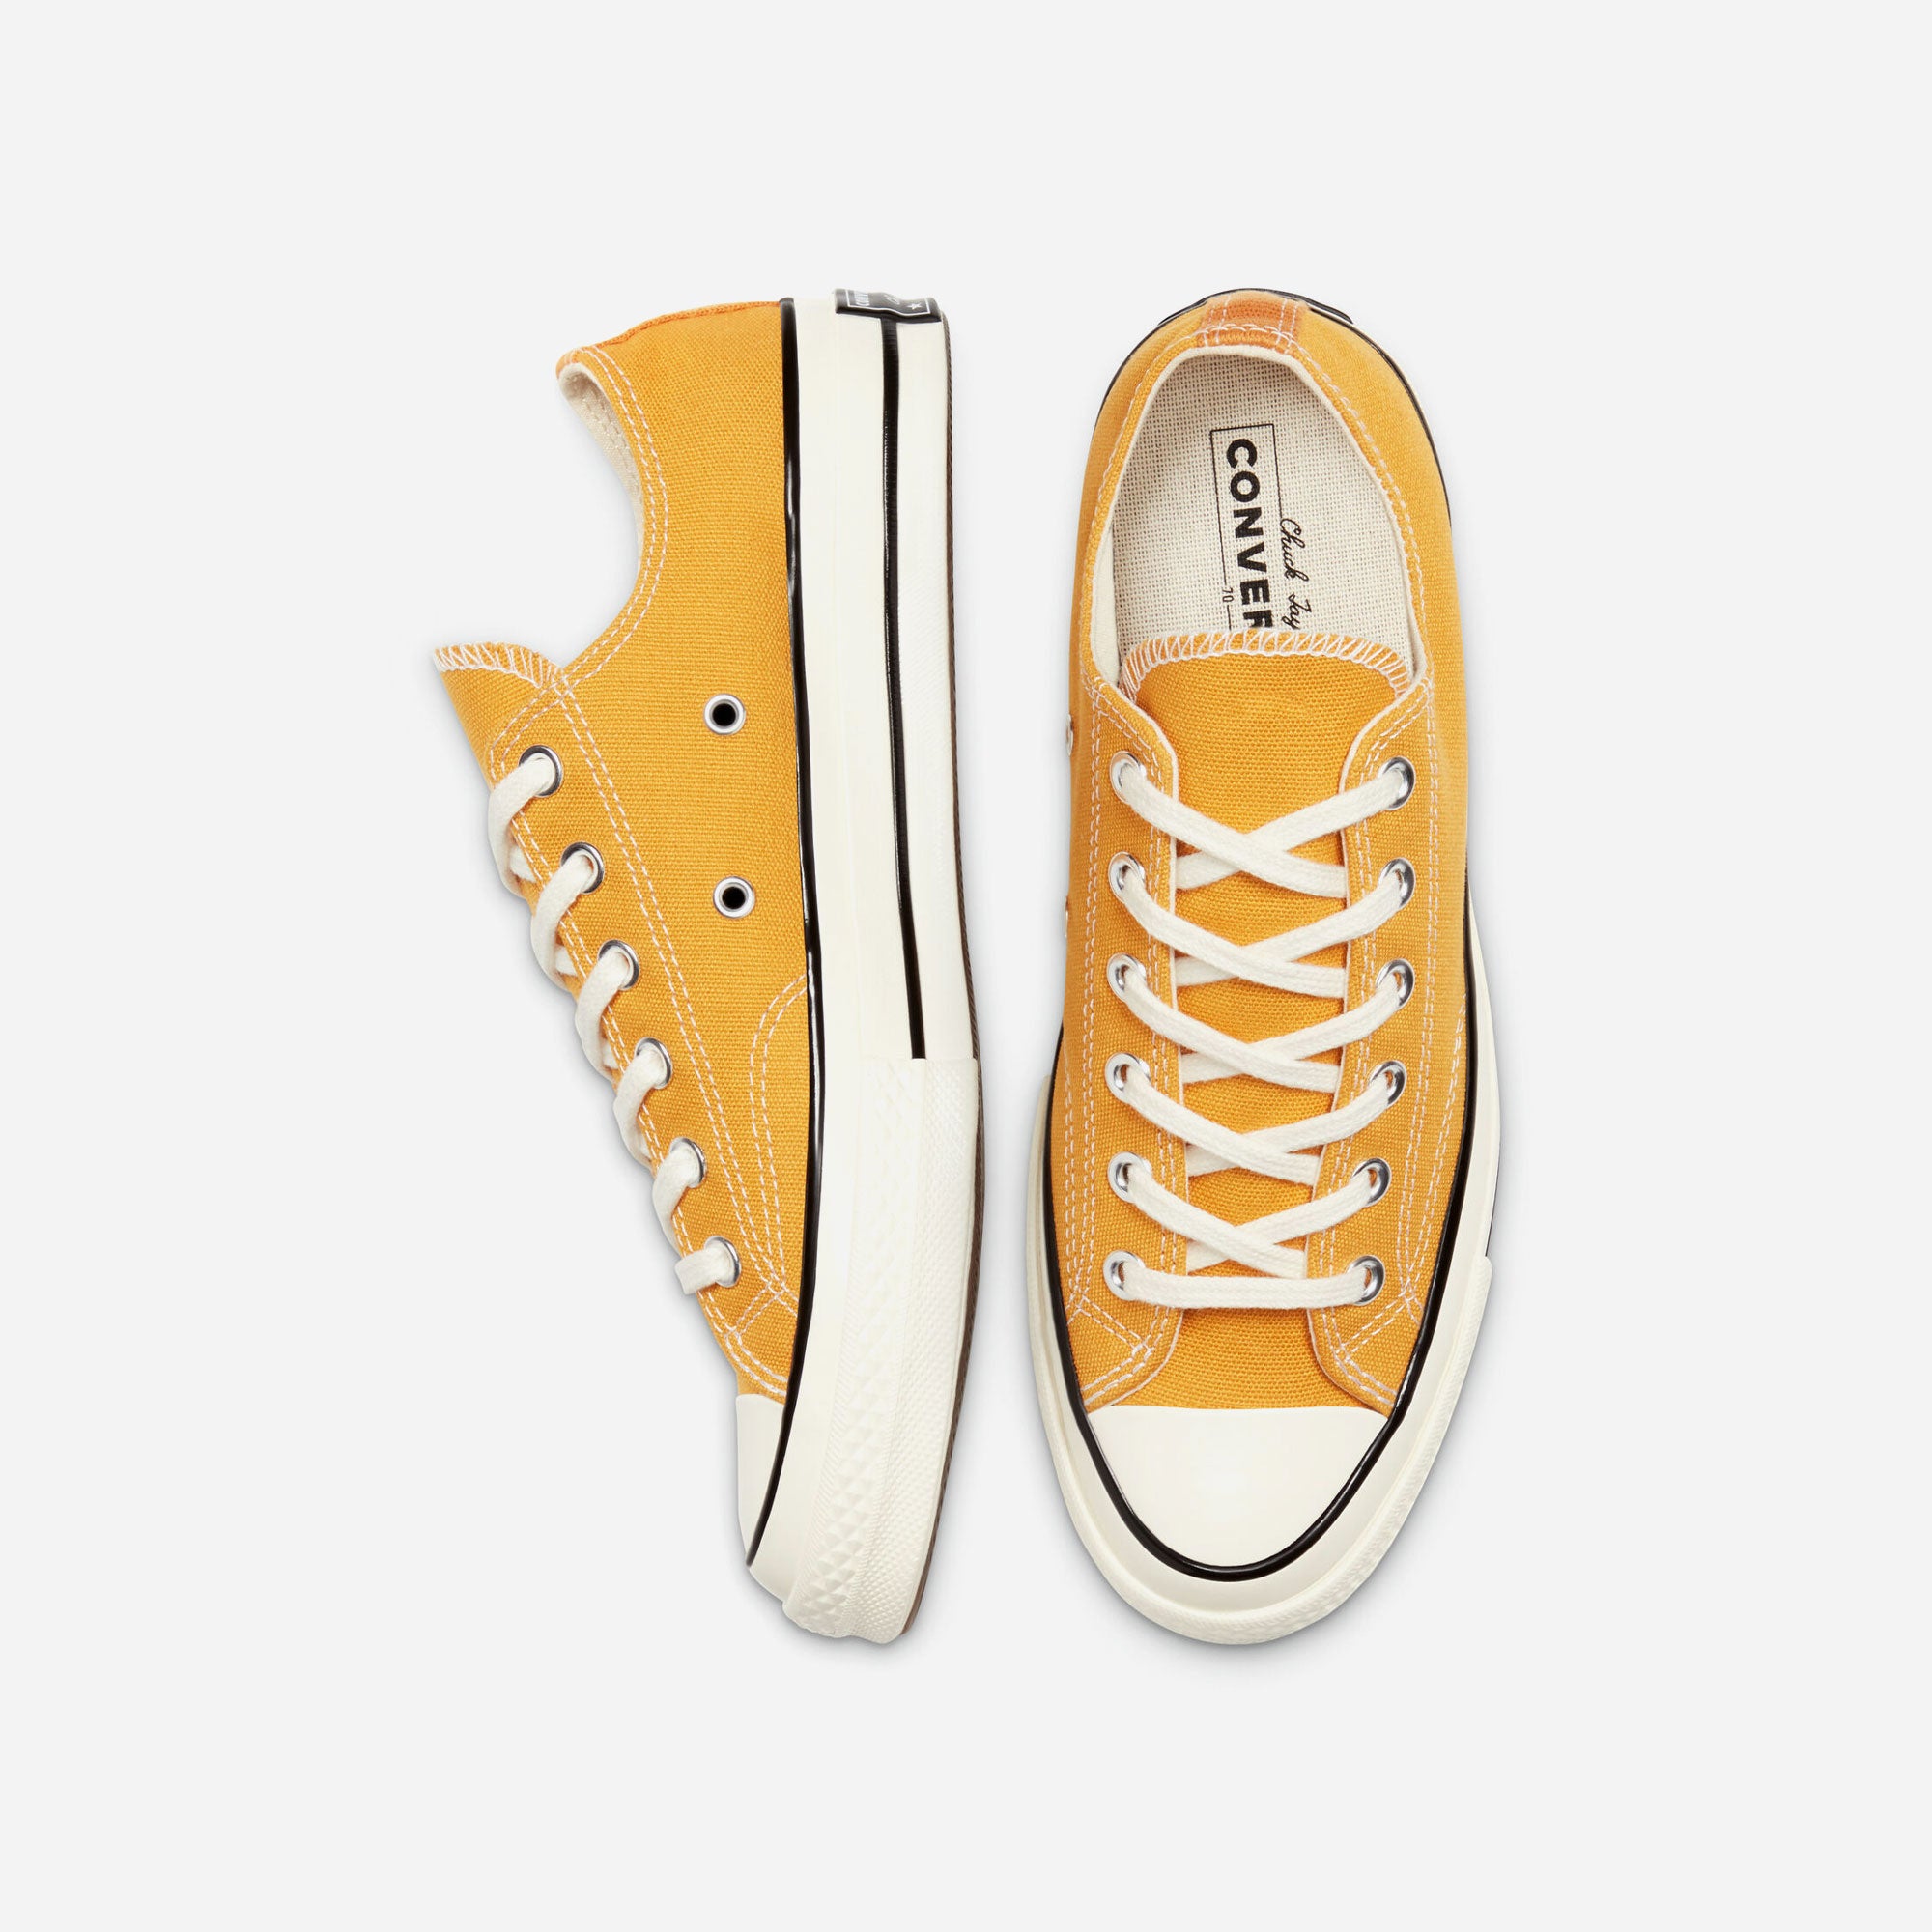 Giày Thời Trang Nam Converse Chuck Taylor All Star 1970S Sunflower - Low - Supersports Vietnam